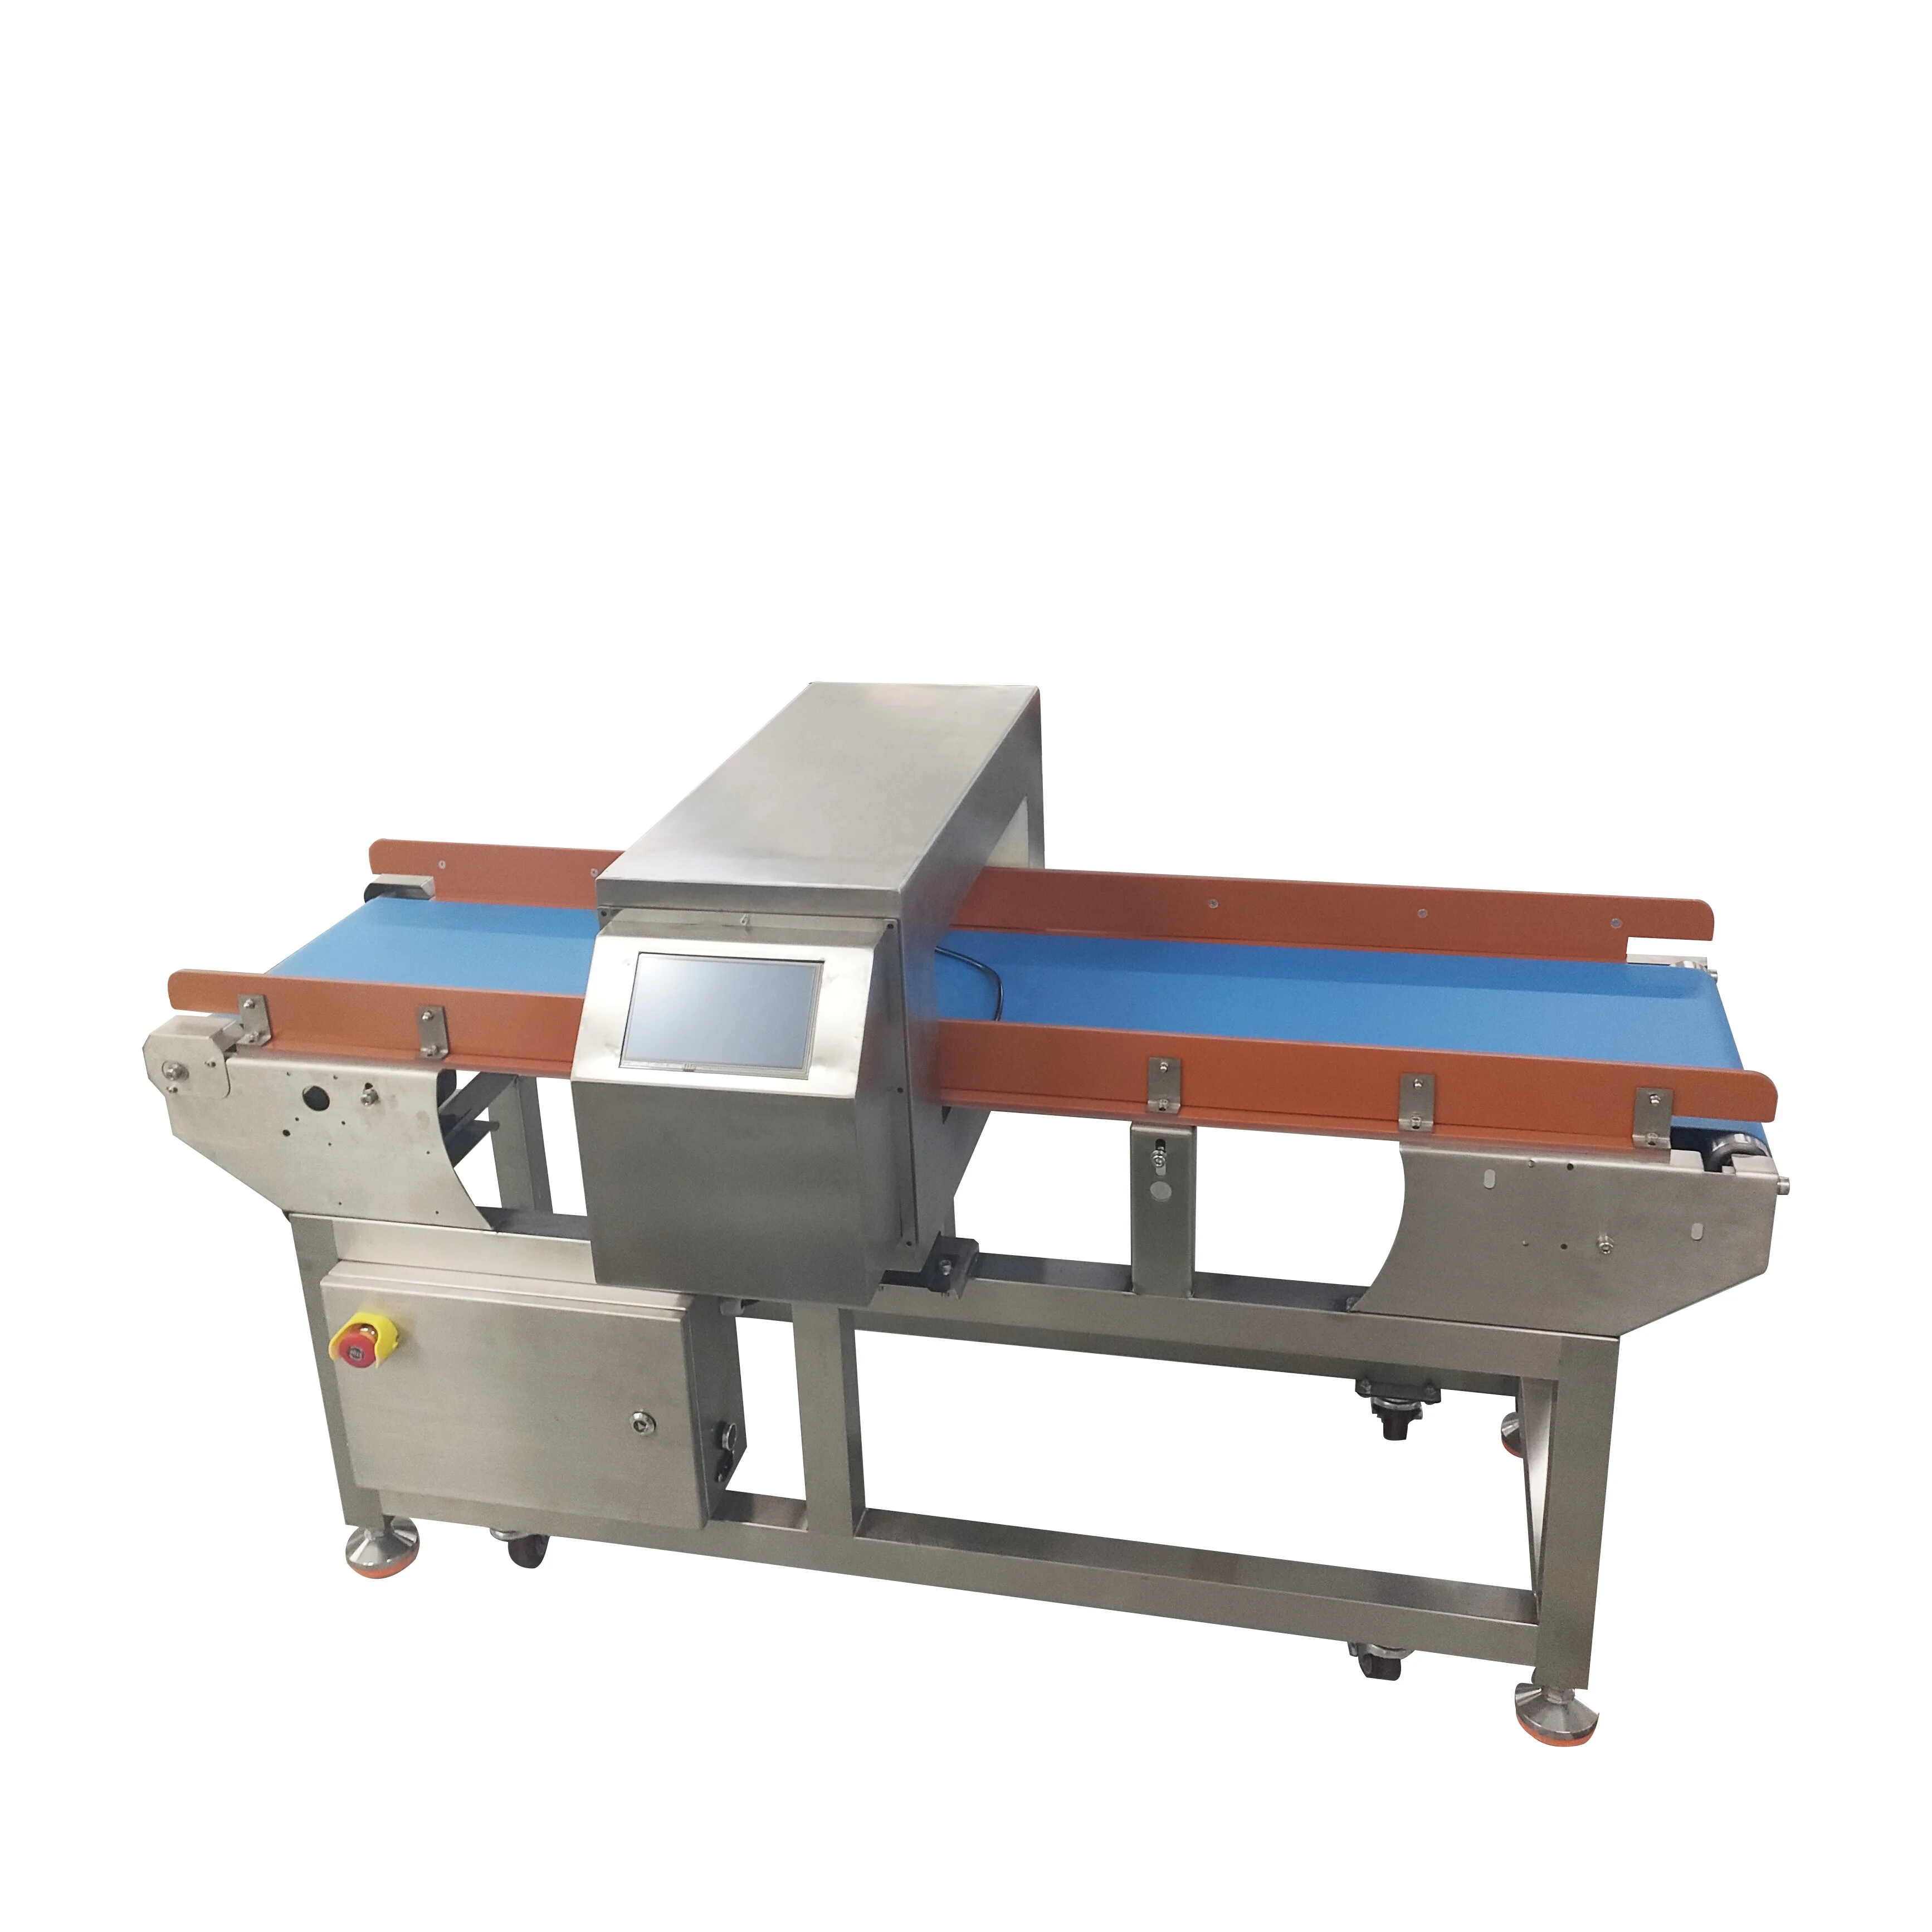 

Factory Price Food Industrial Using Metal Detector Food Metal Detector Food Safty Detection Machine For Factory Production Lines